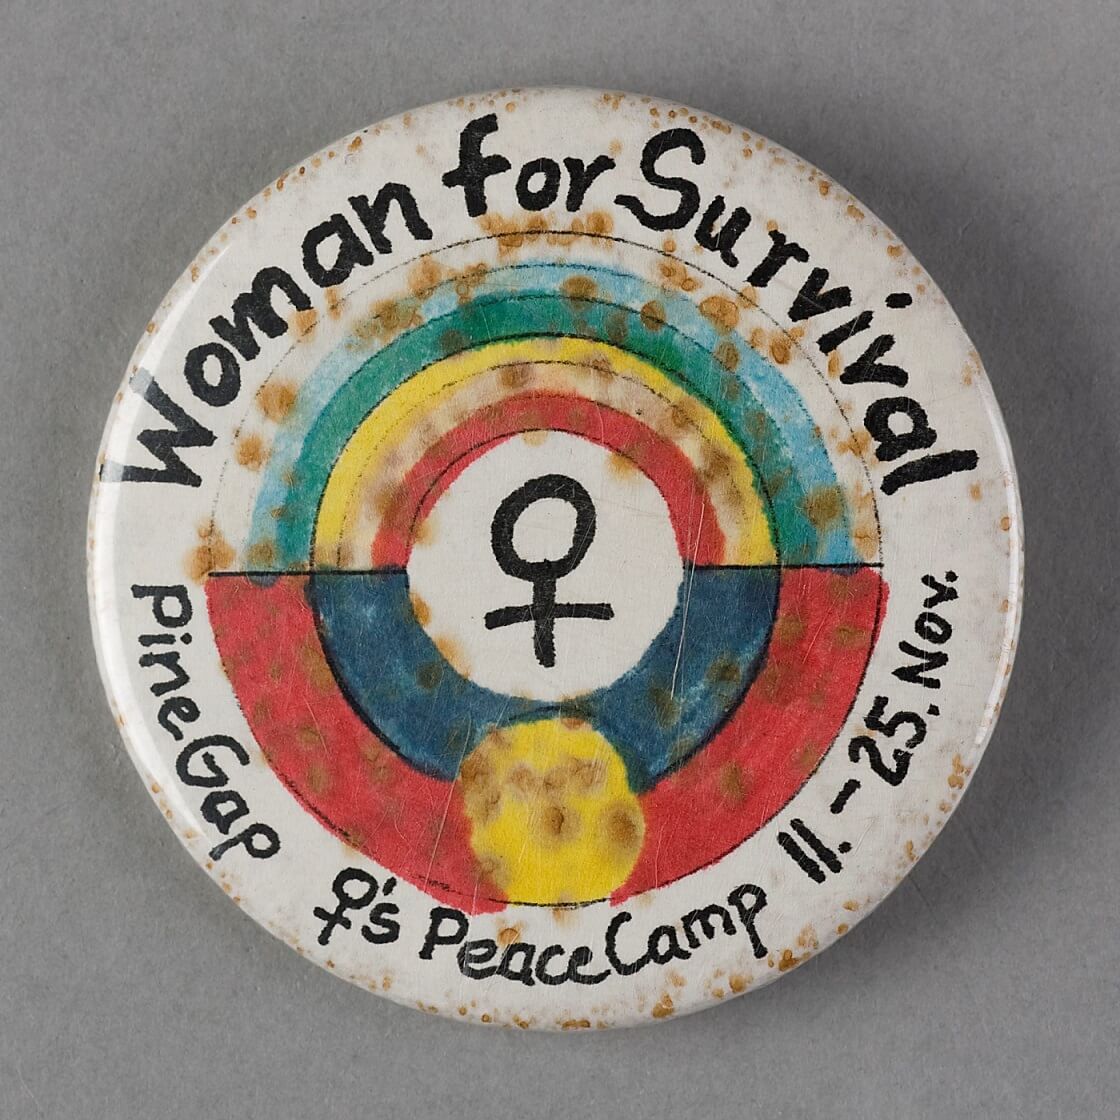 Image of a badge with text "Woman for Survival | Pine Gap Women's Peace Camp 11-25 November" with a rainbow flag and Aboriginal flag circling the womens symbol